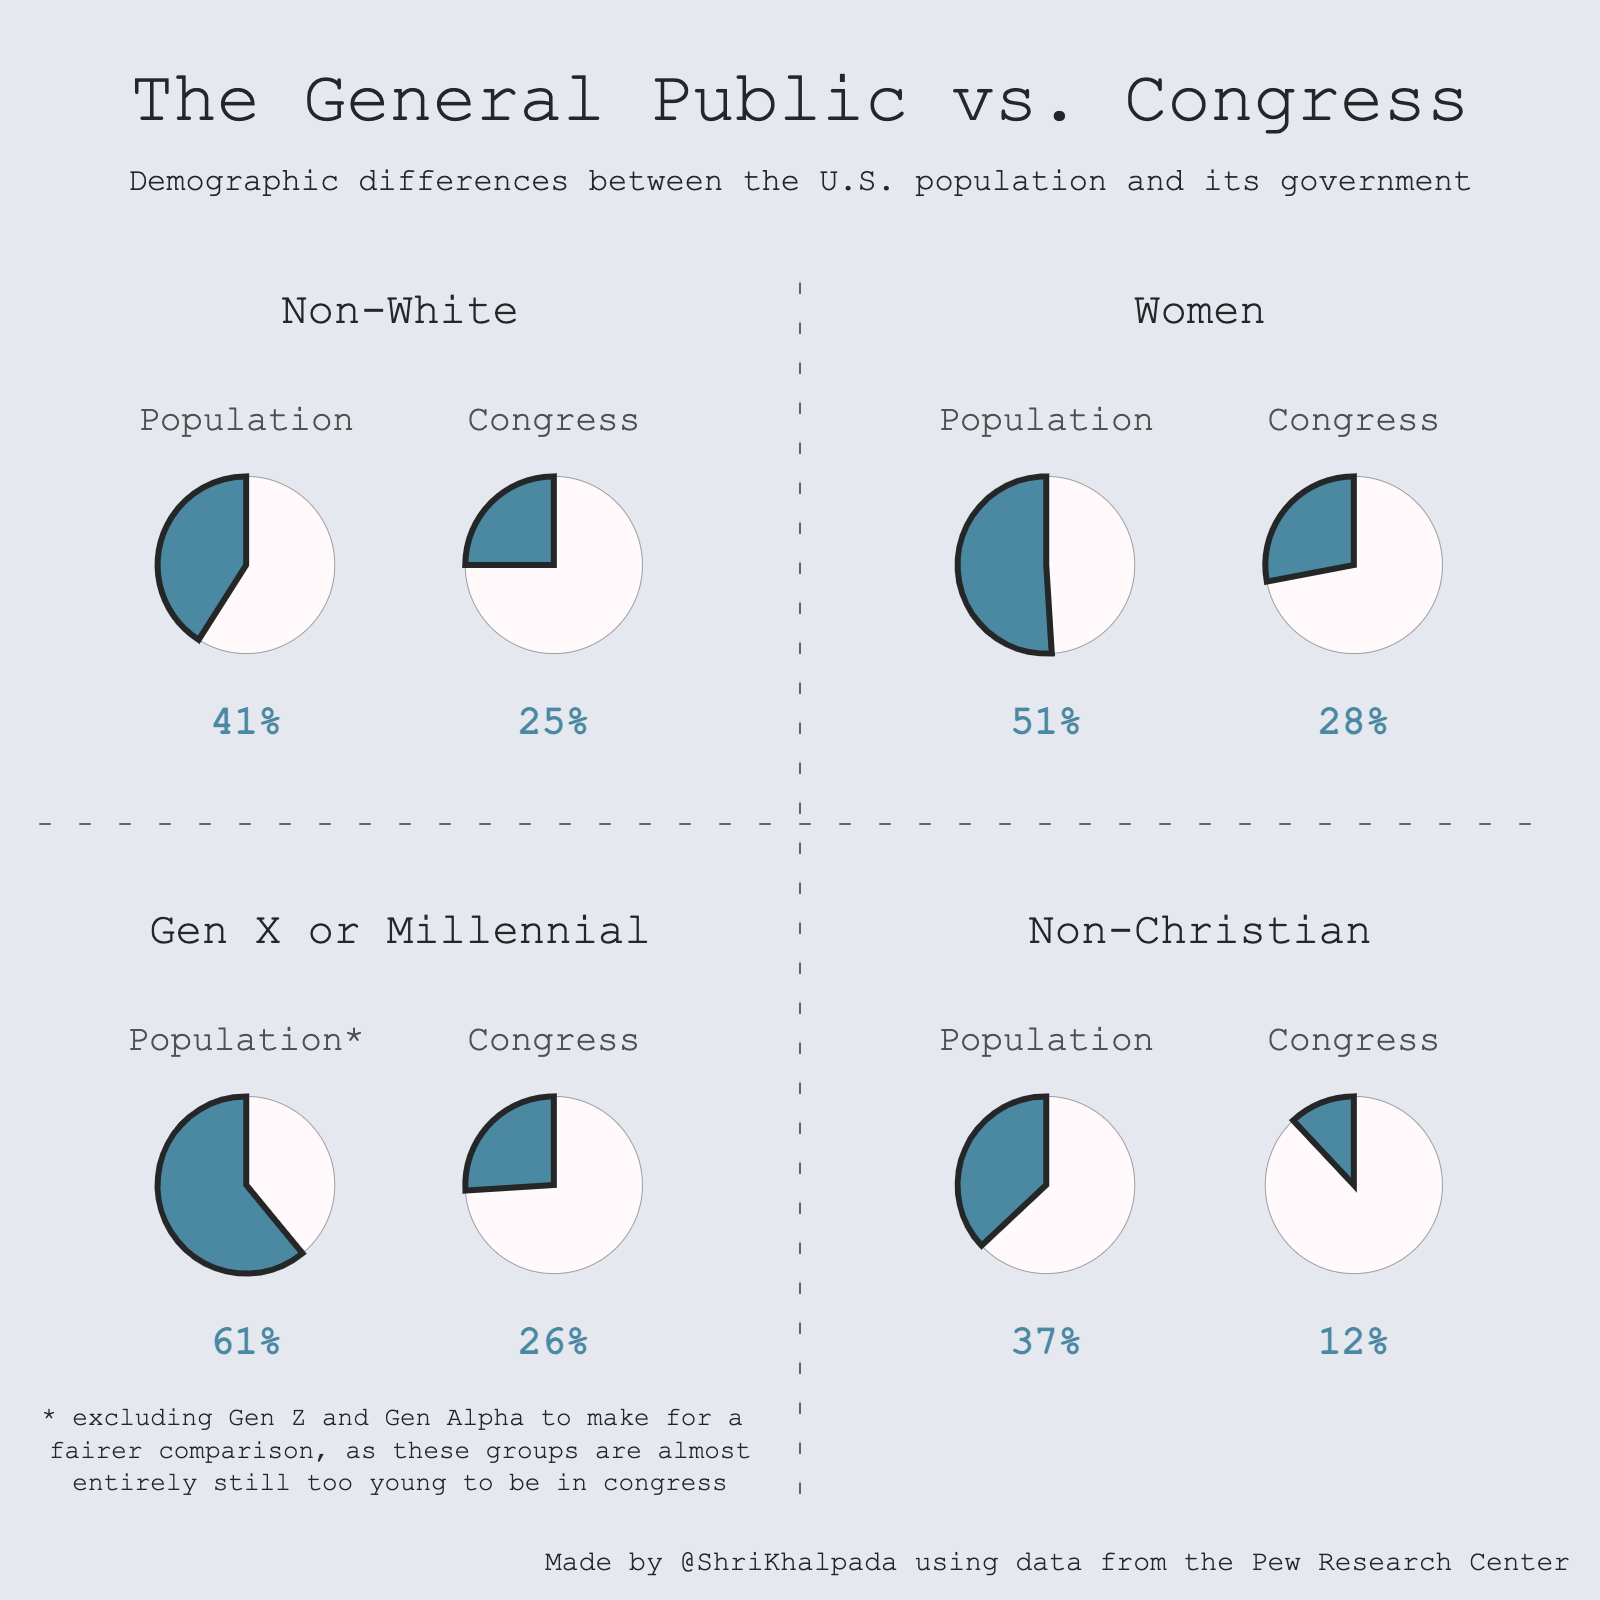 Four pie charts under the title "The General Public vs. Congress," comparing the percentage of non-white, women, Gen X or Millennials, and non-Christians in the general U.S. population to their representation in Congress.